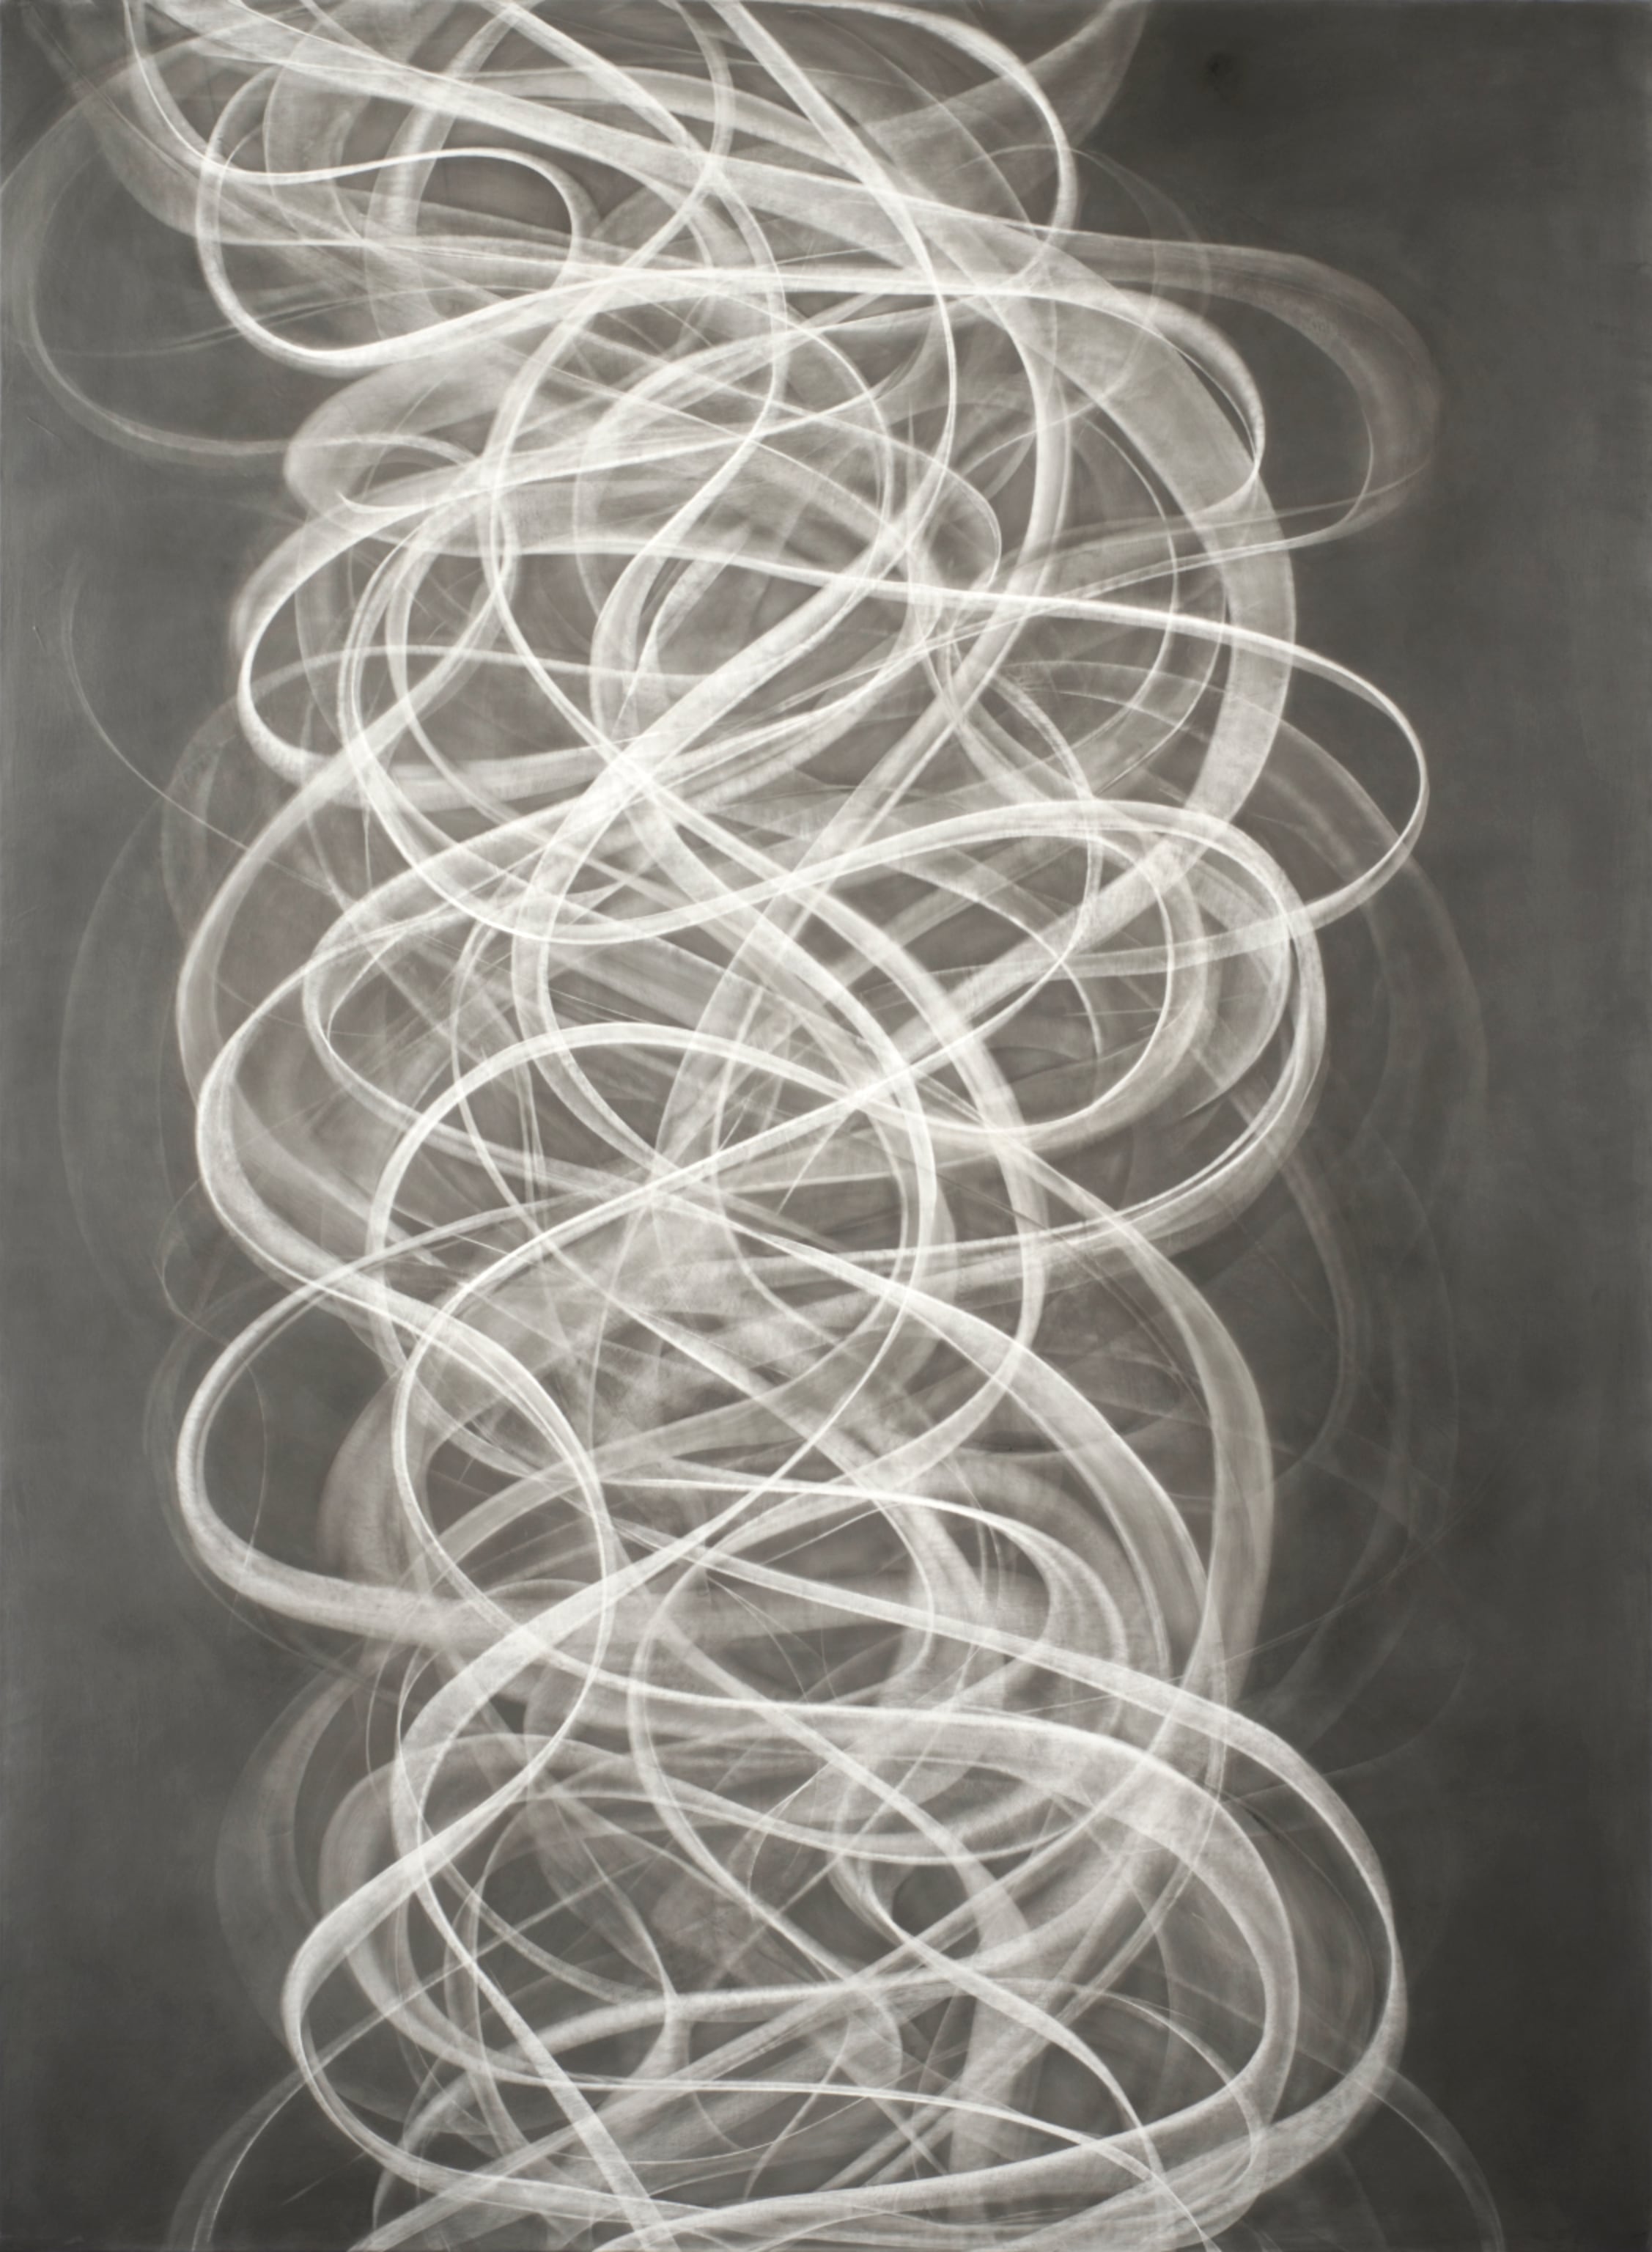 Atlantic, 91 x 64 inches, 42 x 76, oil, alkyd and graphite on linen, 2014